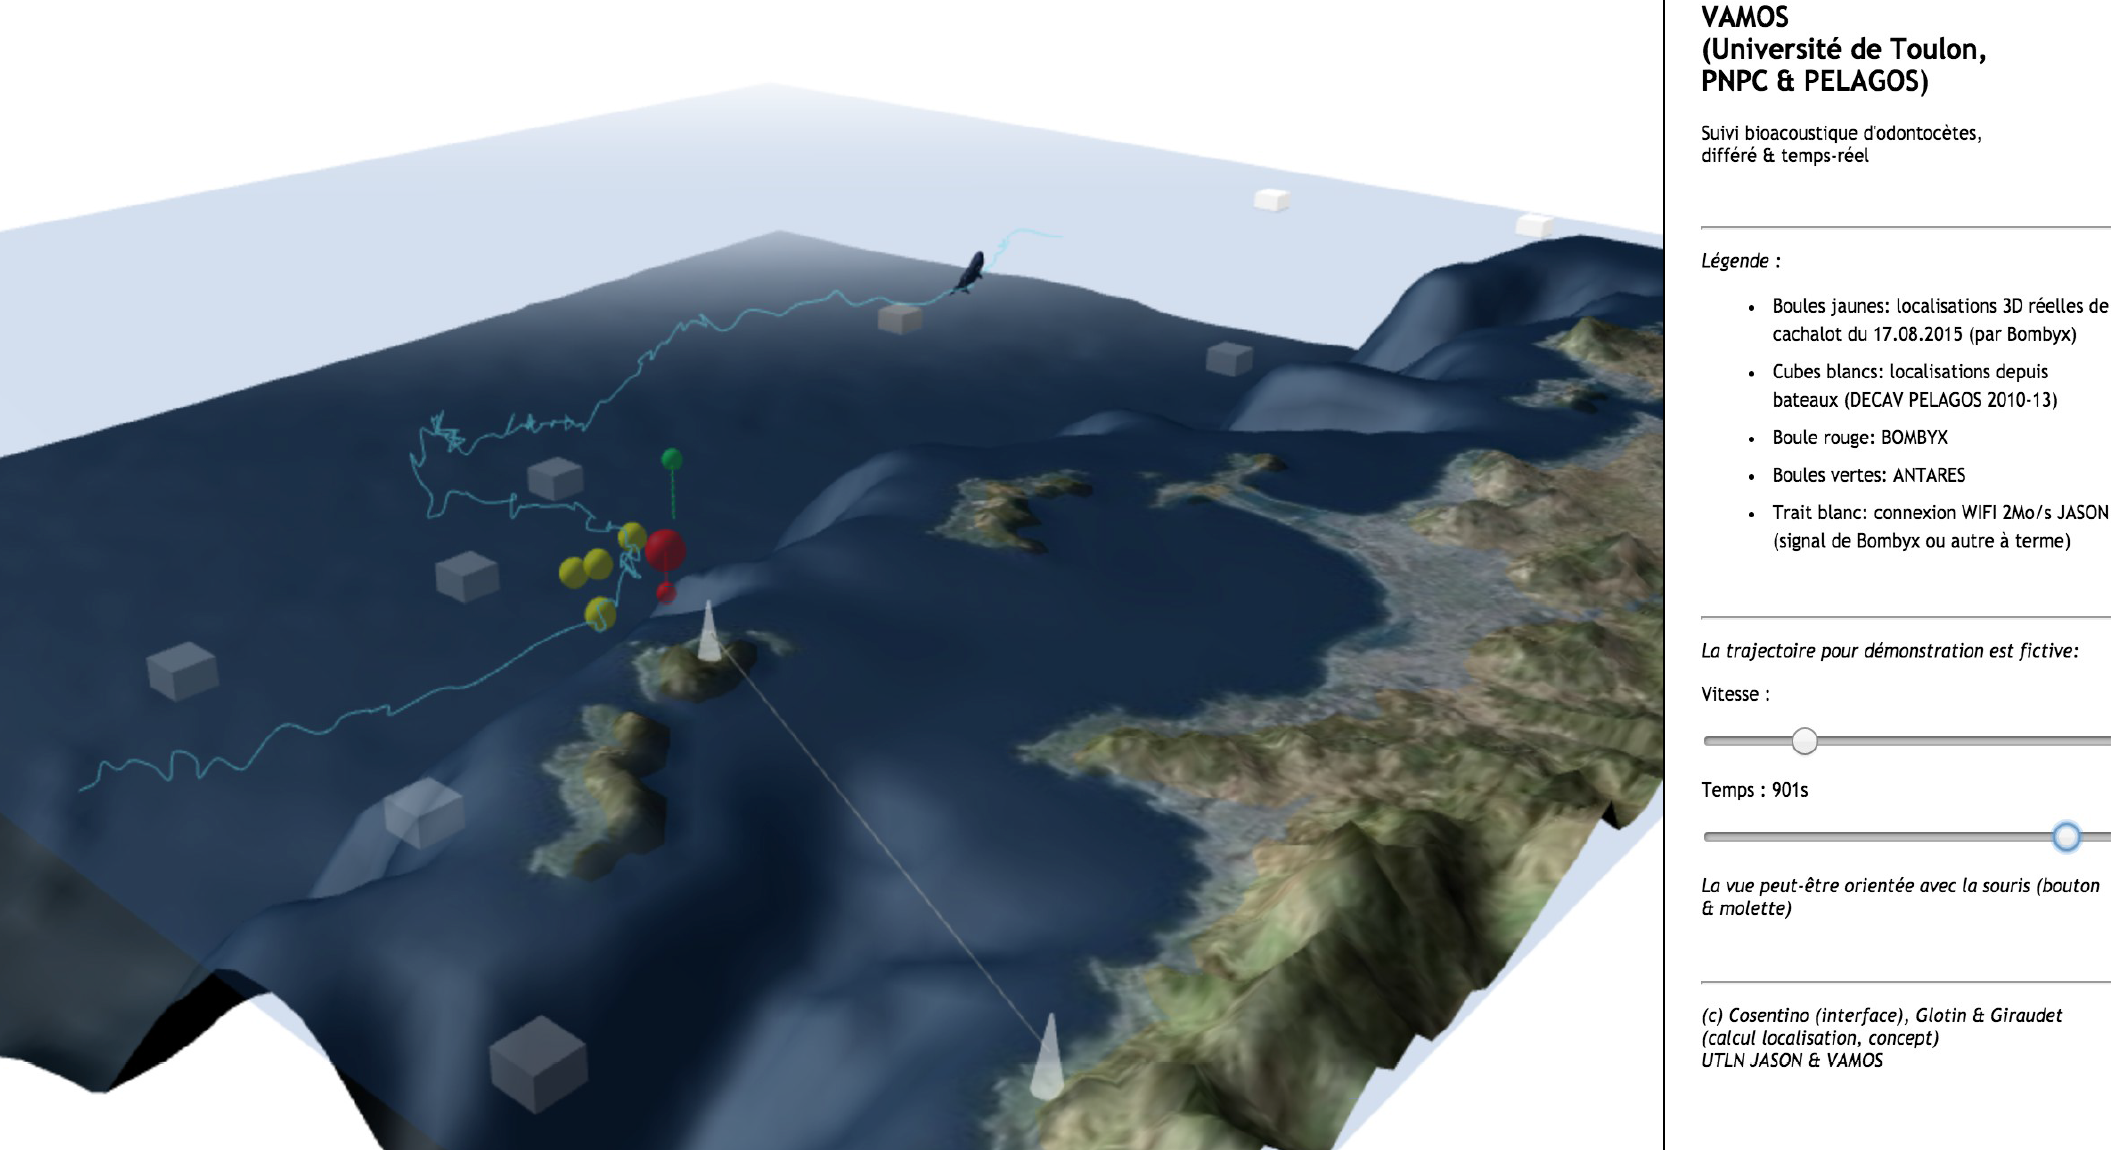 Play here with SABIOD 3D interface that localizes detected whales...